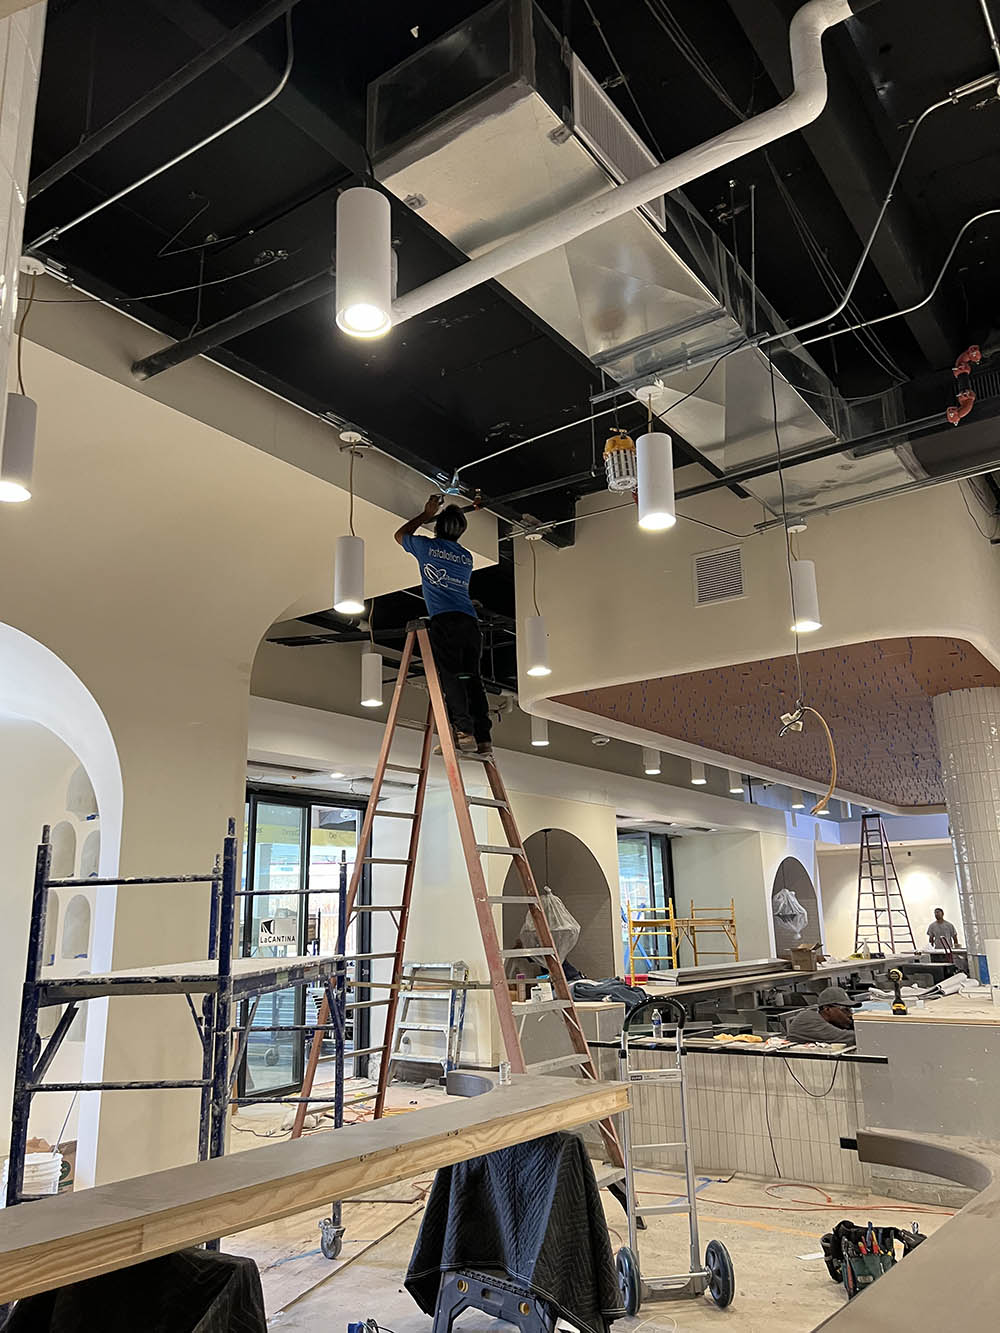 Our dedicated team member skillfully installs state-of-the-art lighting fixtures, enhancing the ambiance of a local restaurant. At Coulombs Electric, we're not just installing lights; we're elevating experiences, one fixture at a time.